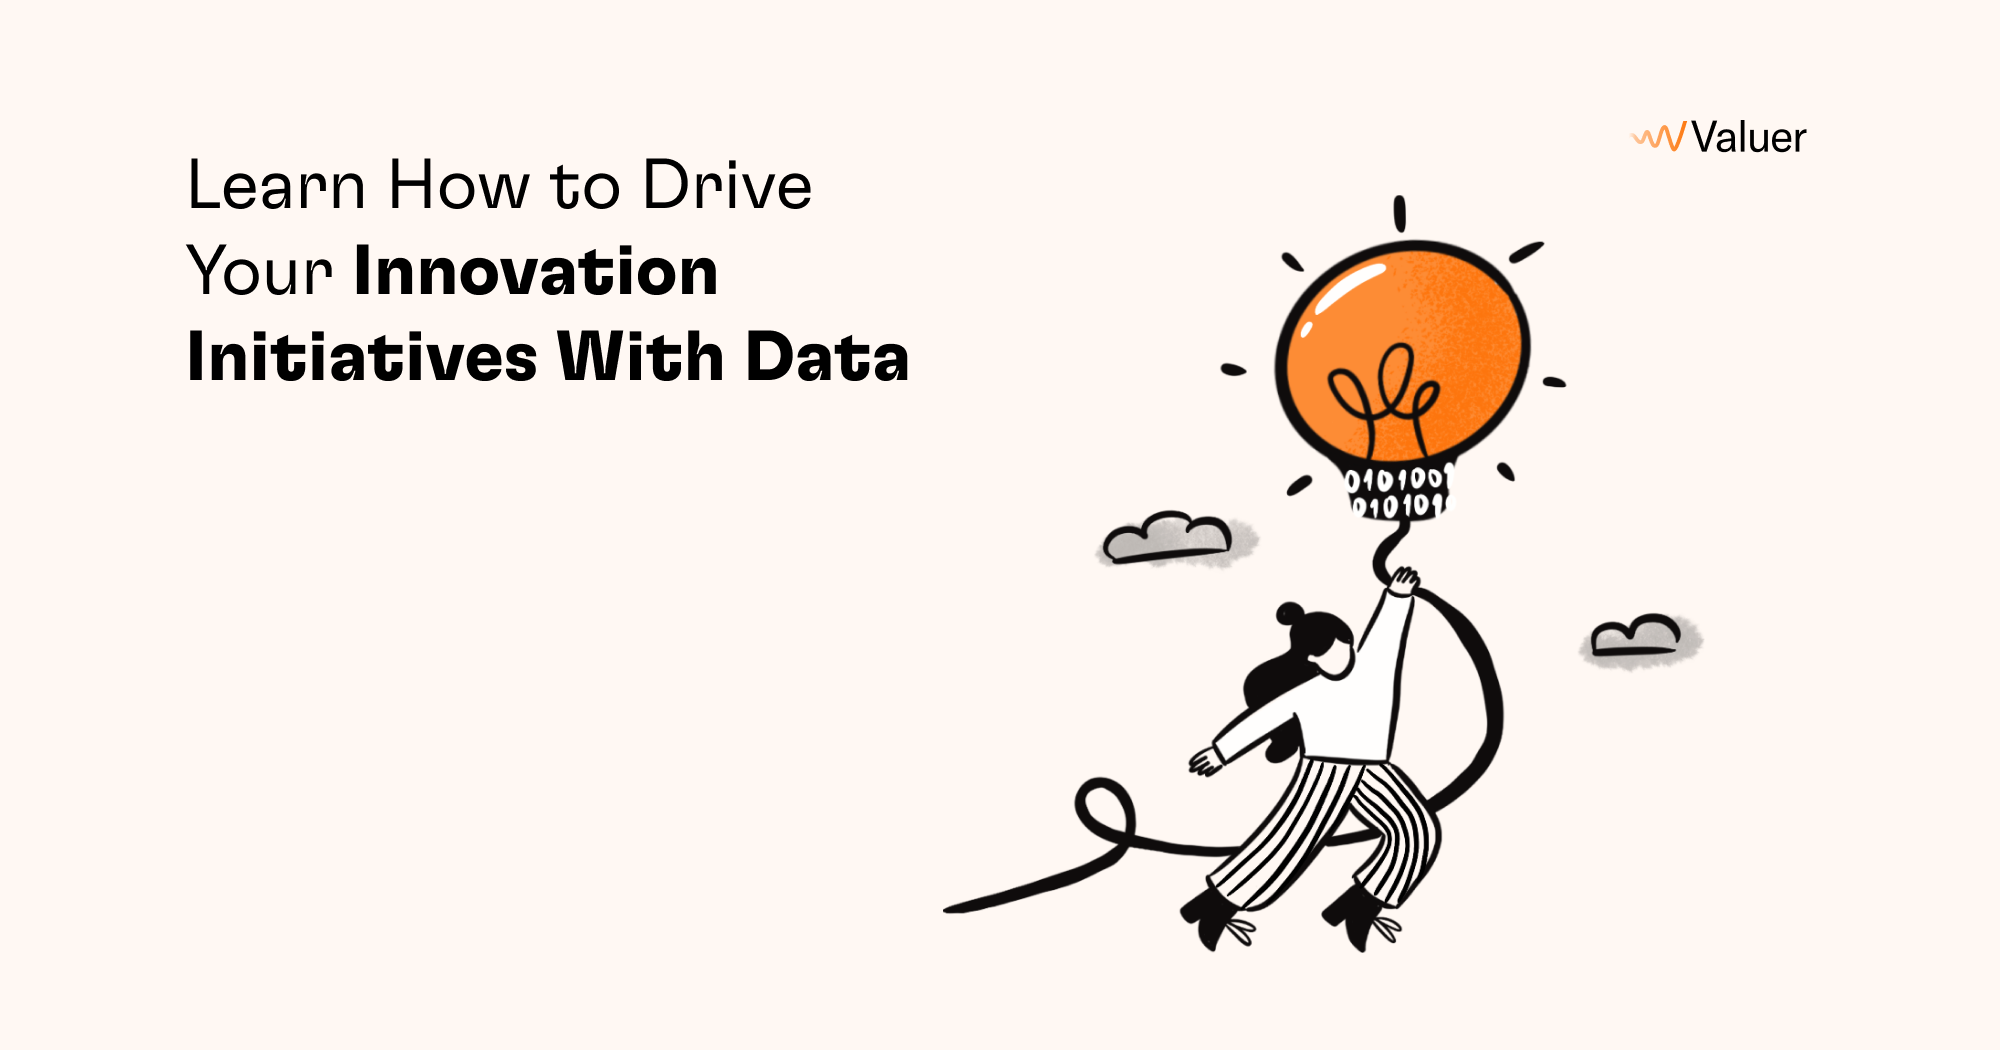 Learn How to Drive Your Innovation Initiatives With Data